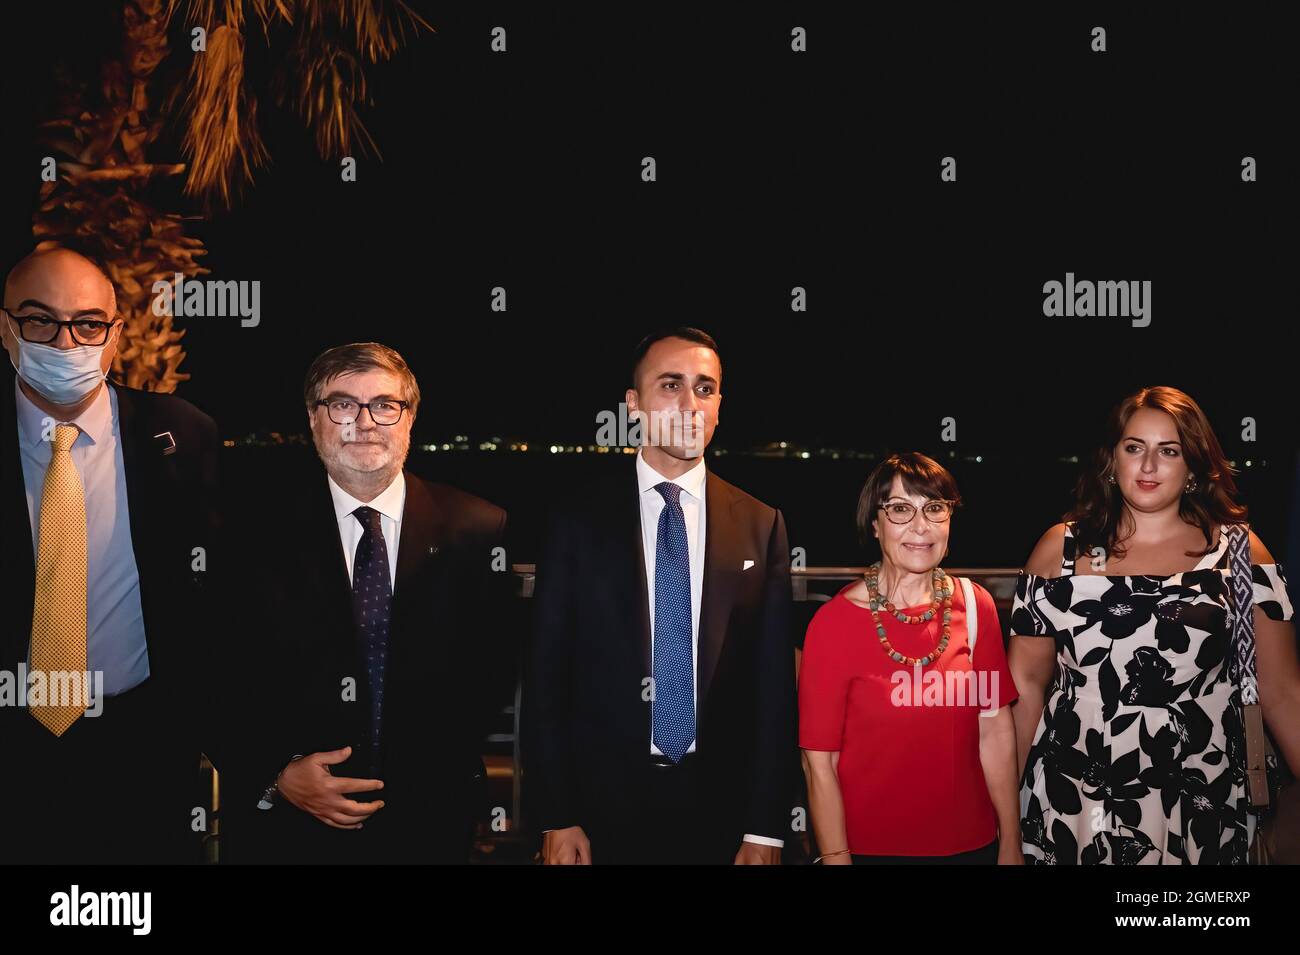 Deputy Giuseppe D'Ippolito (L), Dalila Nesci (R), undersecretary for the South and territorial cohesion, pose with Minister Di Maio (L-C), and Amalia Bruni (R-C) in Reggio. Italian Minister of Foreign Affairs and International Cooperation Luigi di Maio (M5S, Movimento 5 Stelle) arrived in Reggio Calabria in support of the aspiring Governor Amalia Bruni (PD, Partito Democratico), candidate for the centre-left coalition at the Regional elections (3-4 October 2021). Di Maio and Bruni met their supporters at the Chamber of Commerce and later during a dinner at Pepy's Beach Restaurant. Stock Photo